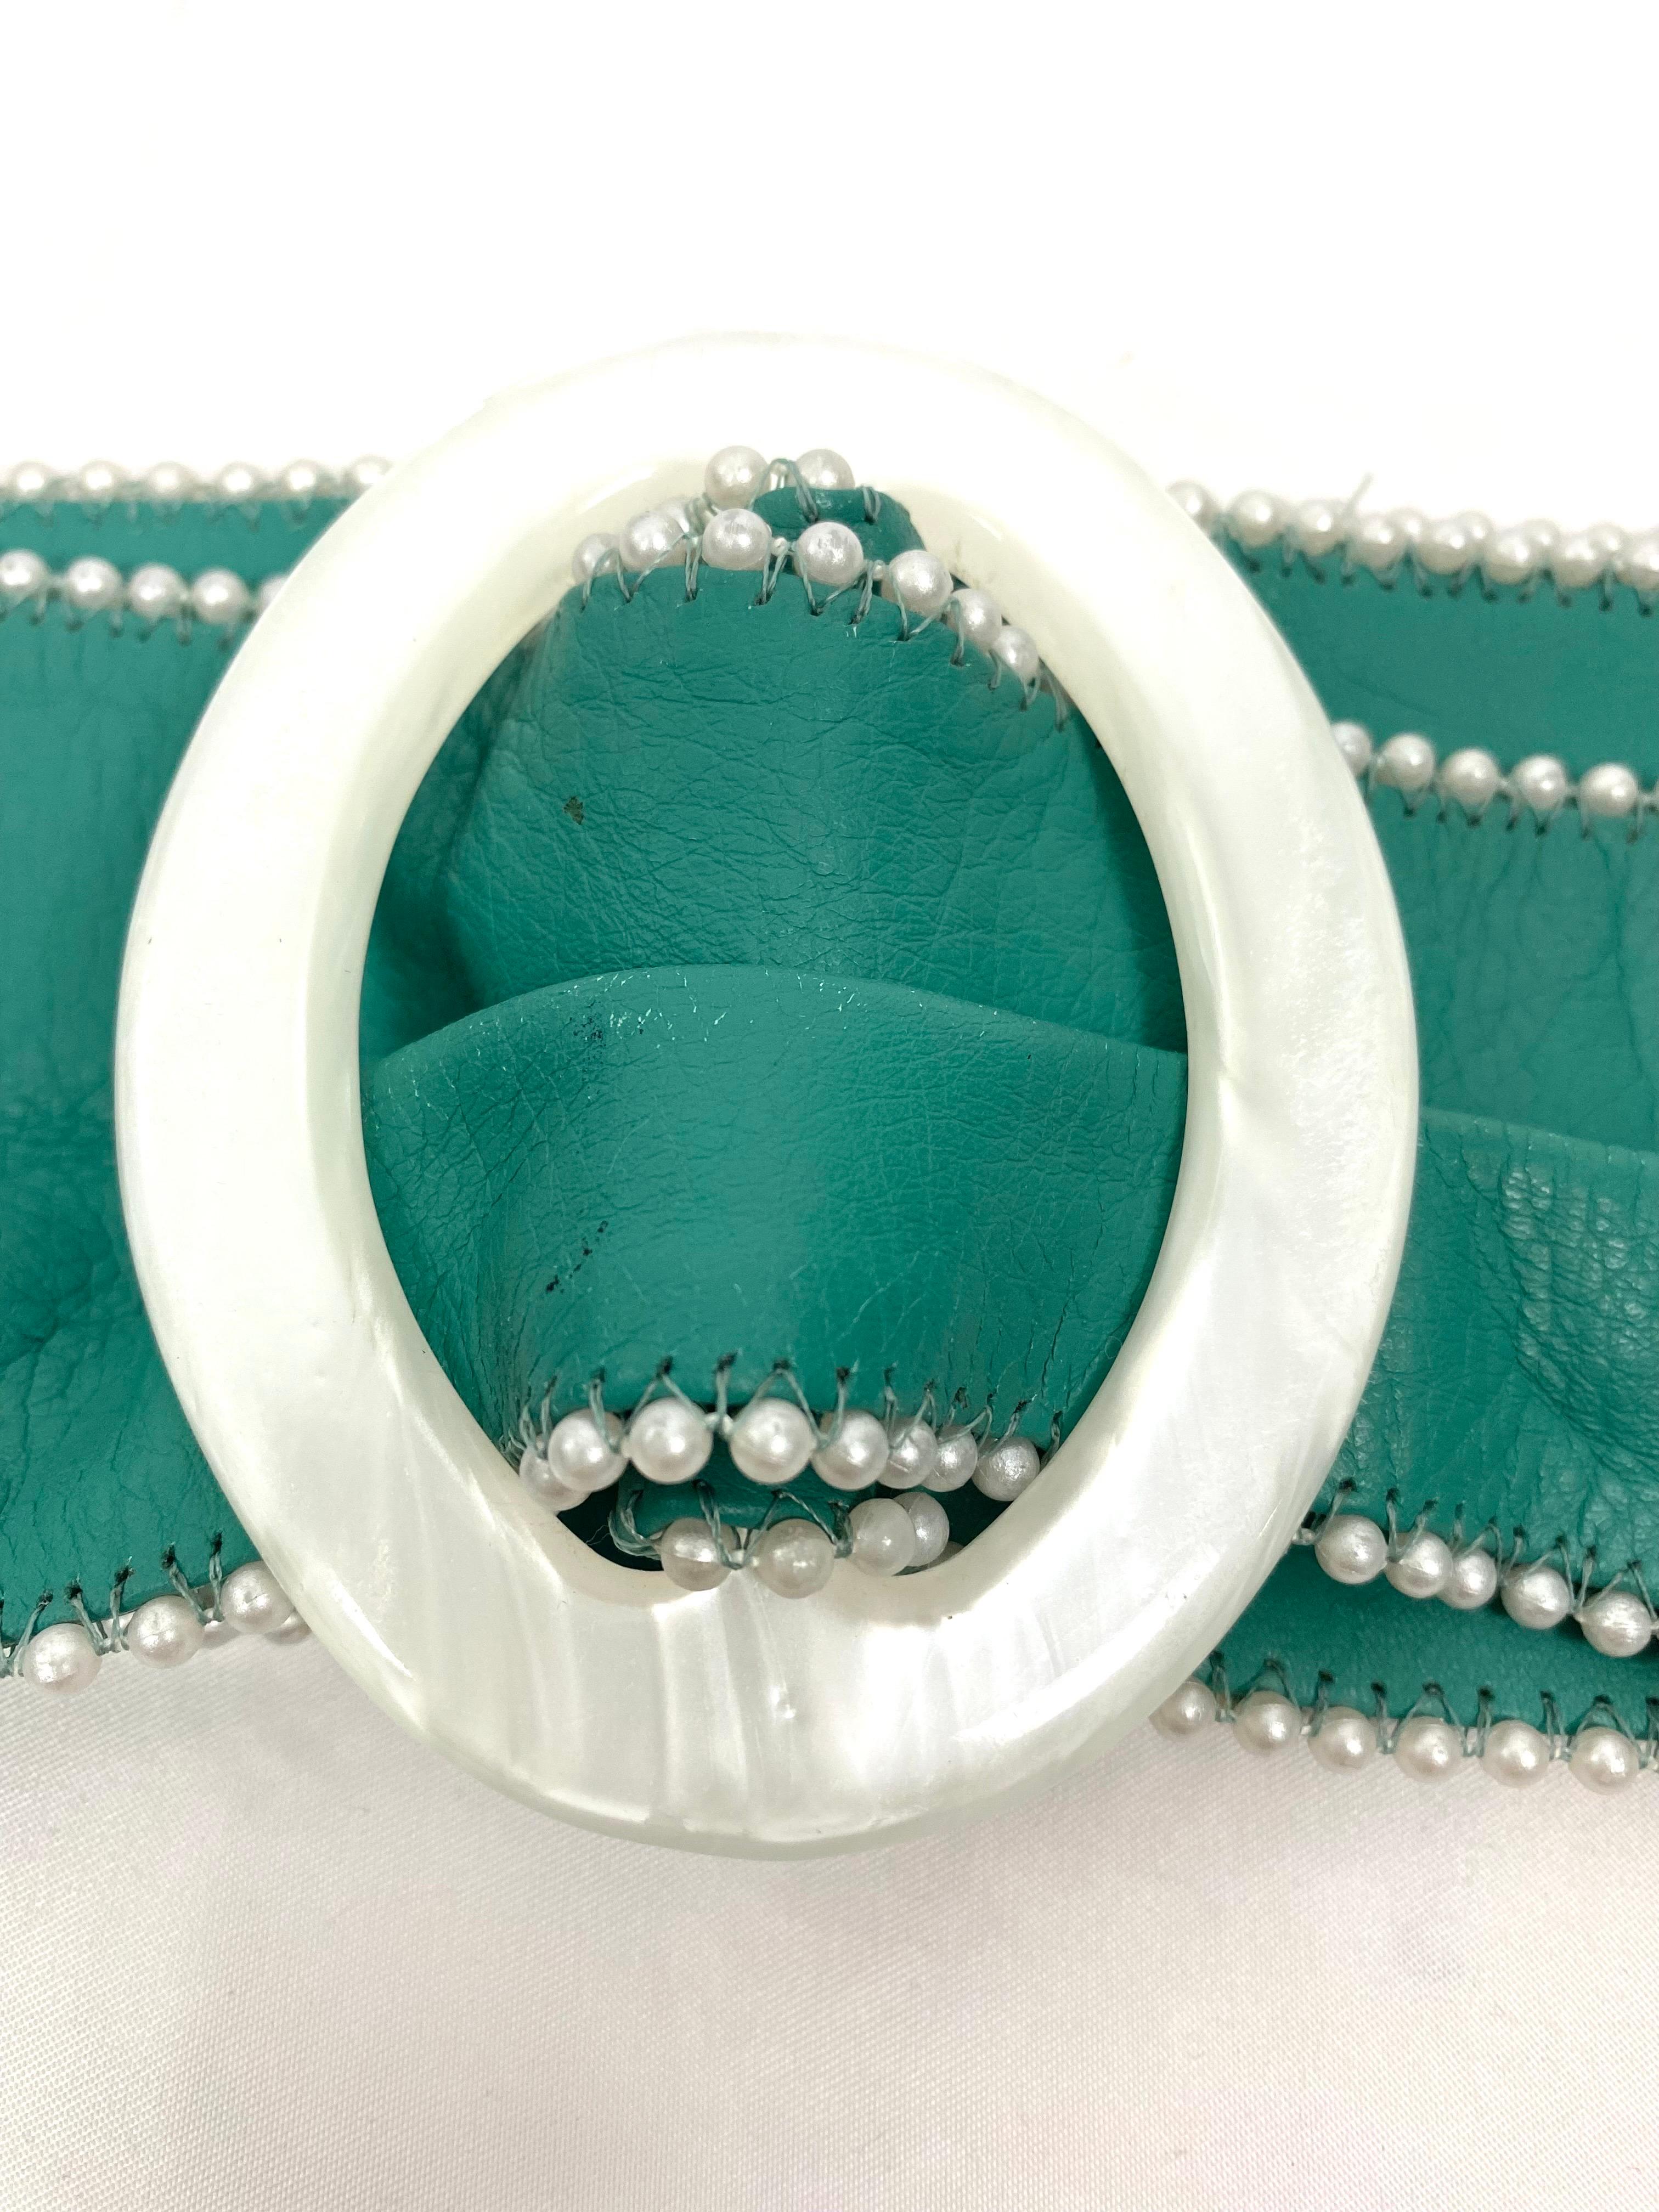 Vintage Yves Saint Laurent turquoise leather belt with pearls and pearly buckle 1